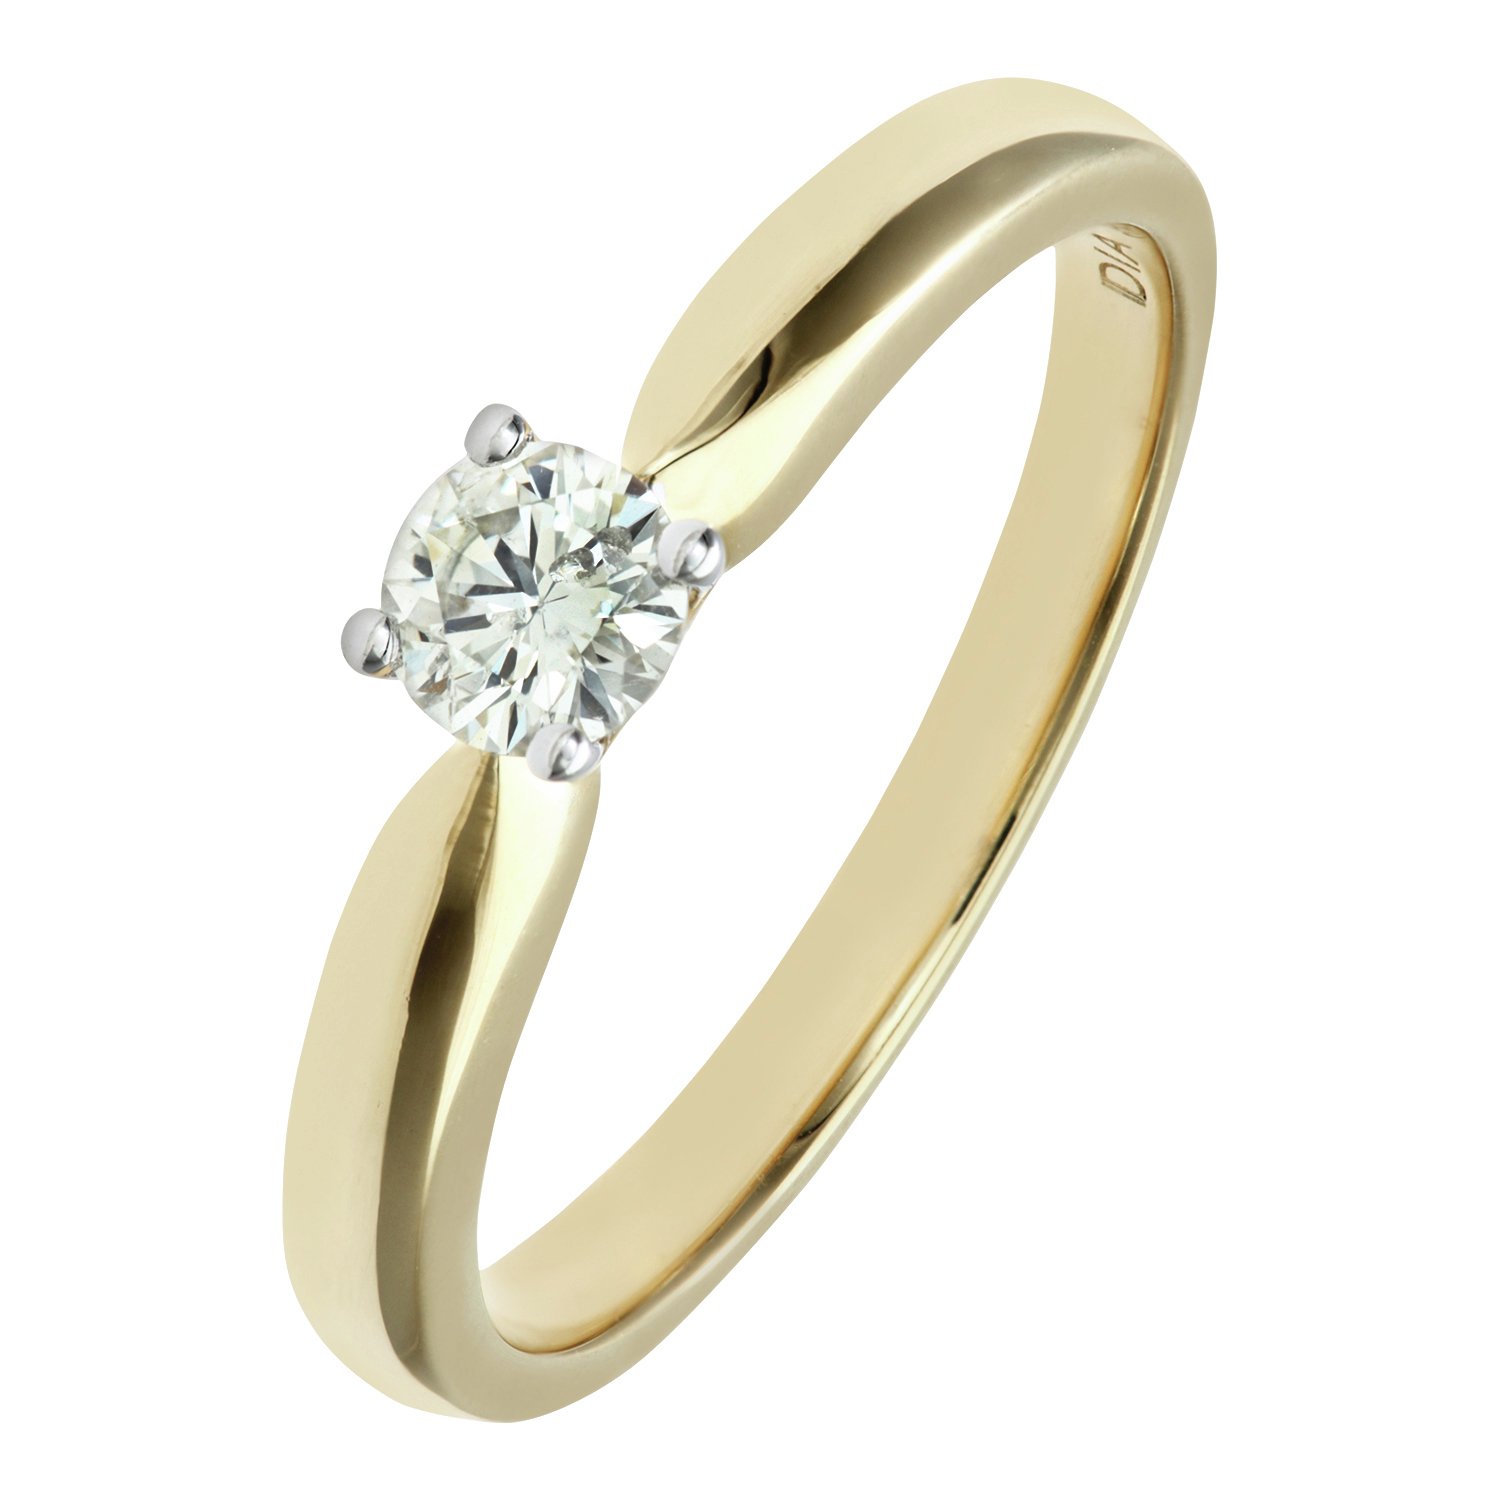 Everlasting Love 9ct Gold Diamond Solitaire Ring - Size M